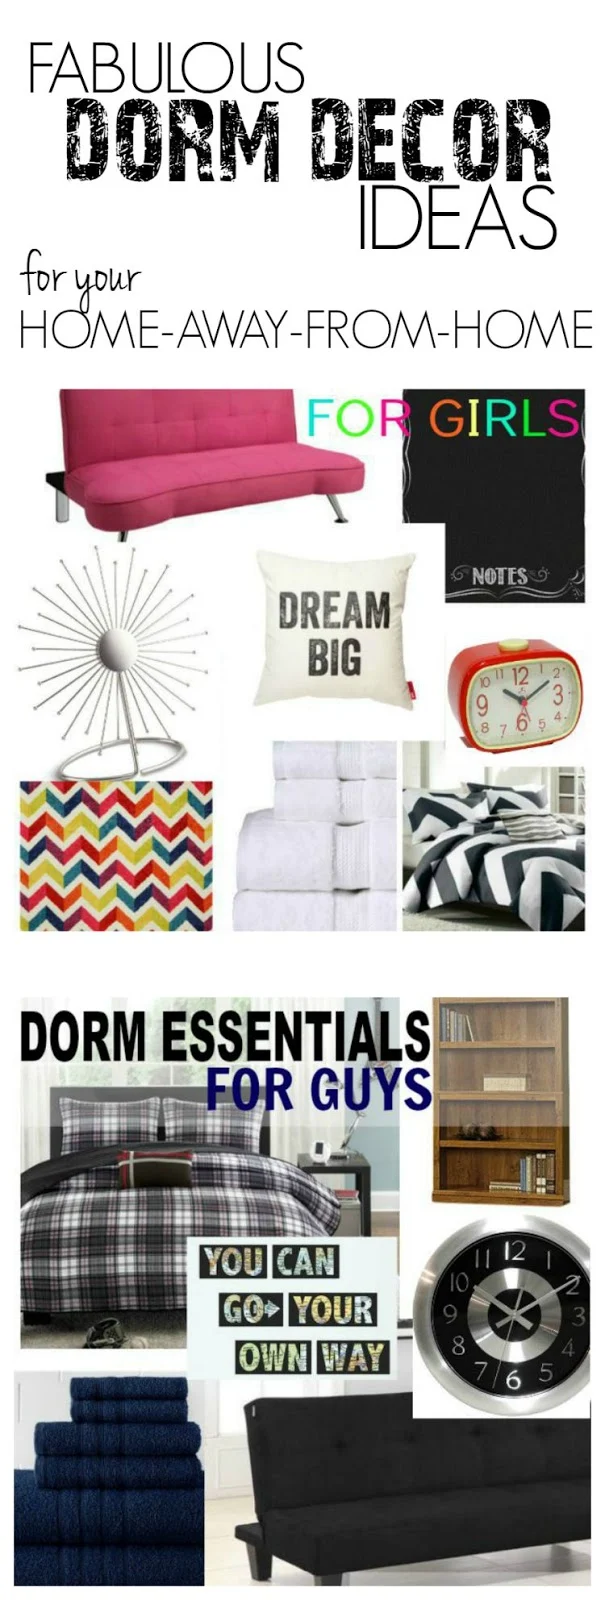 Inspiration and ideas for back to school College living in the dorm!